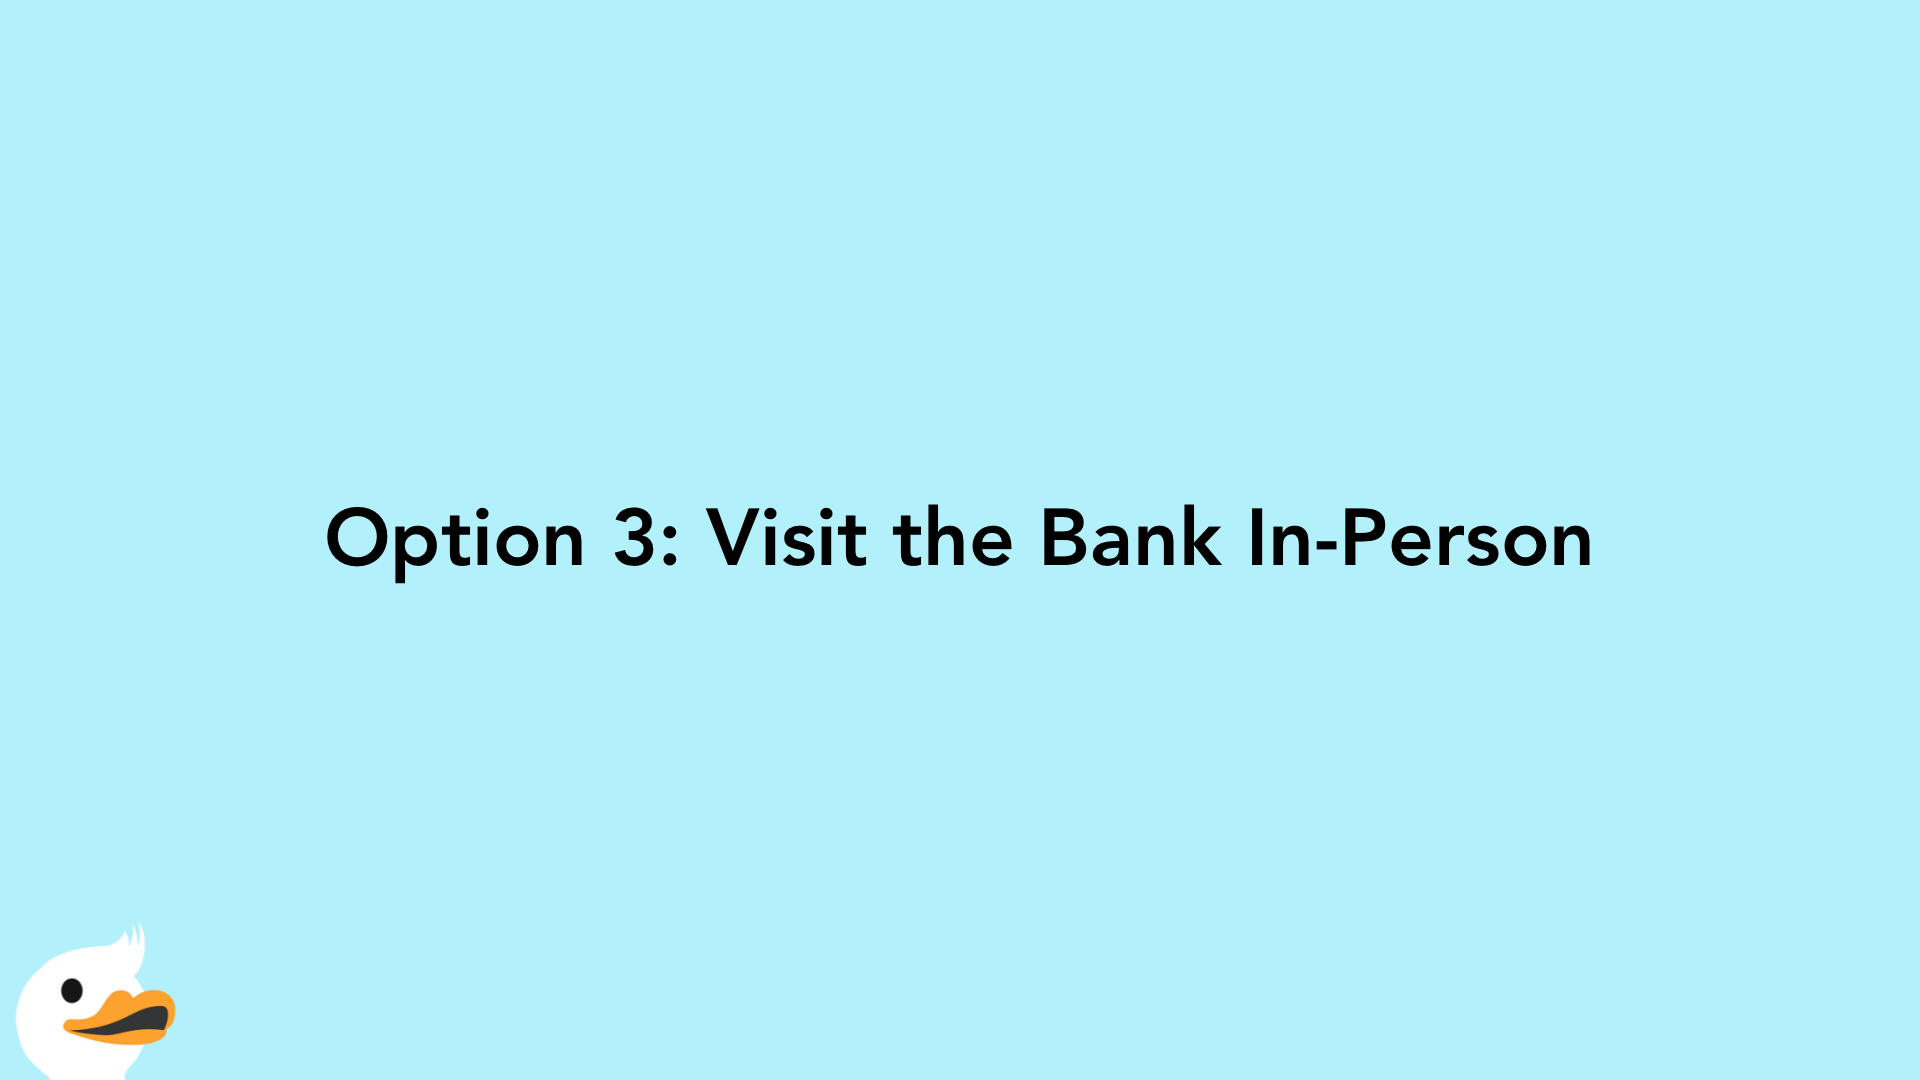 Option 3: Visit the Bank In-Person